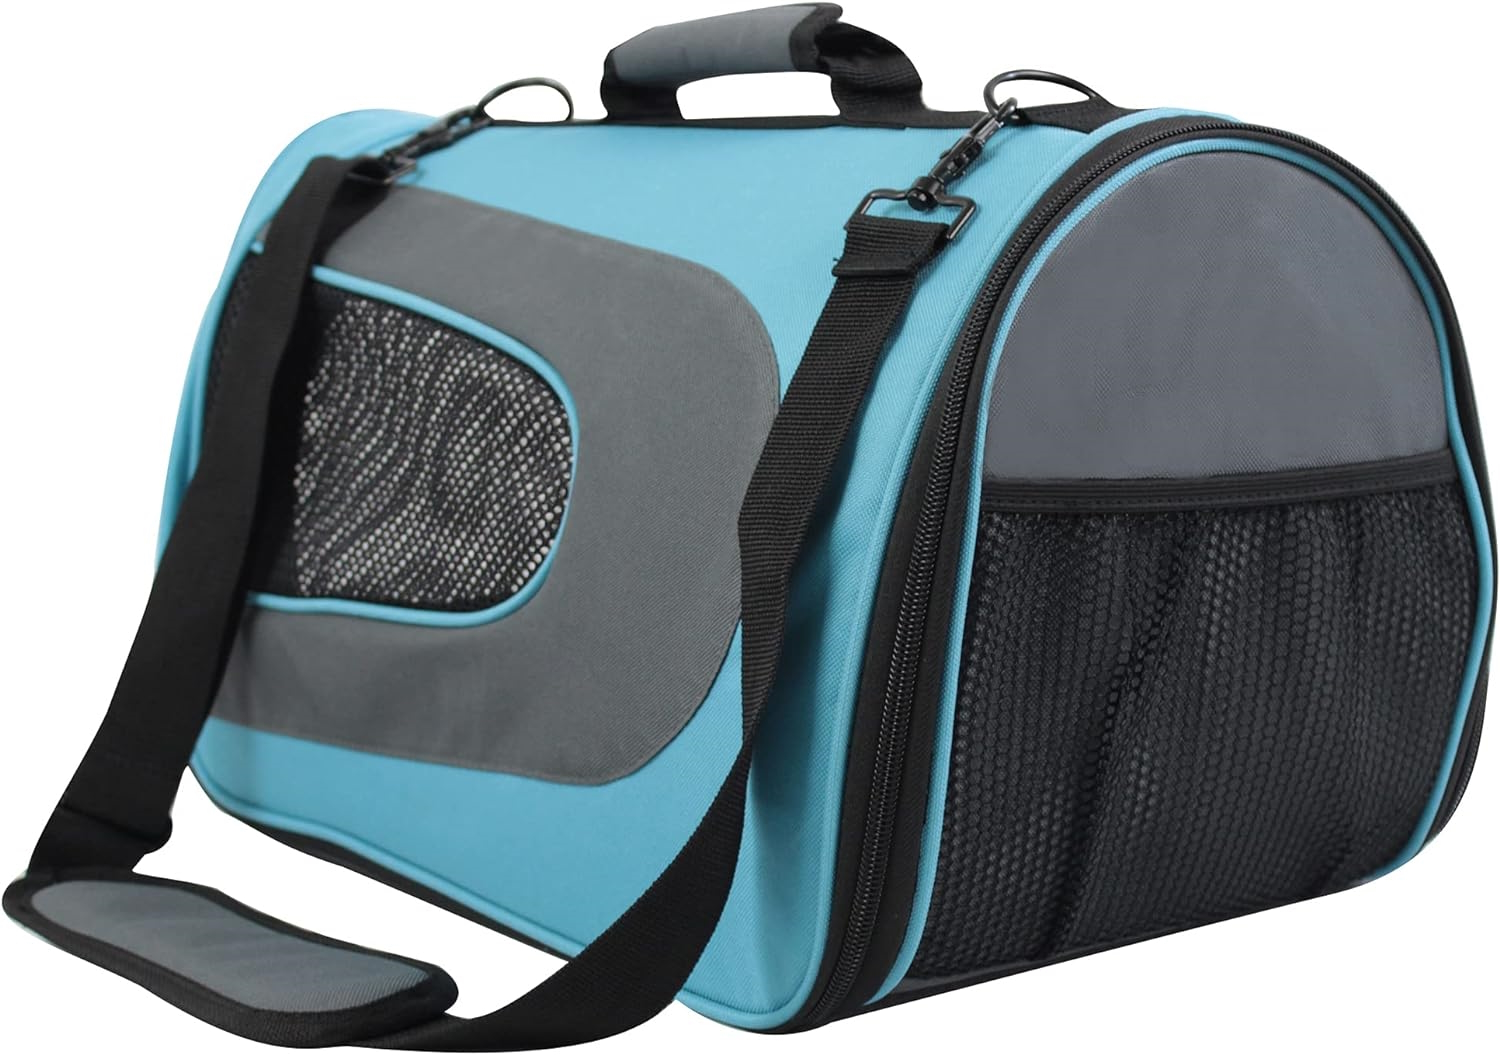 EliteField Deluxe Soft Pet Travel Carrier